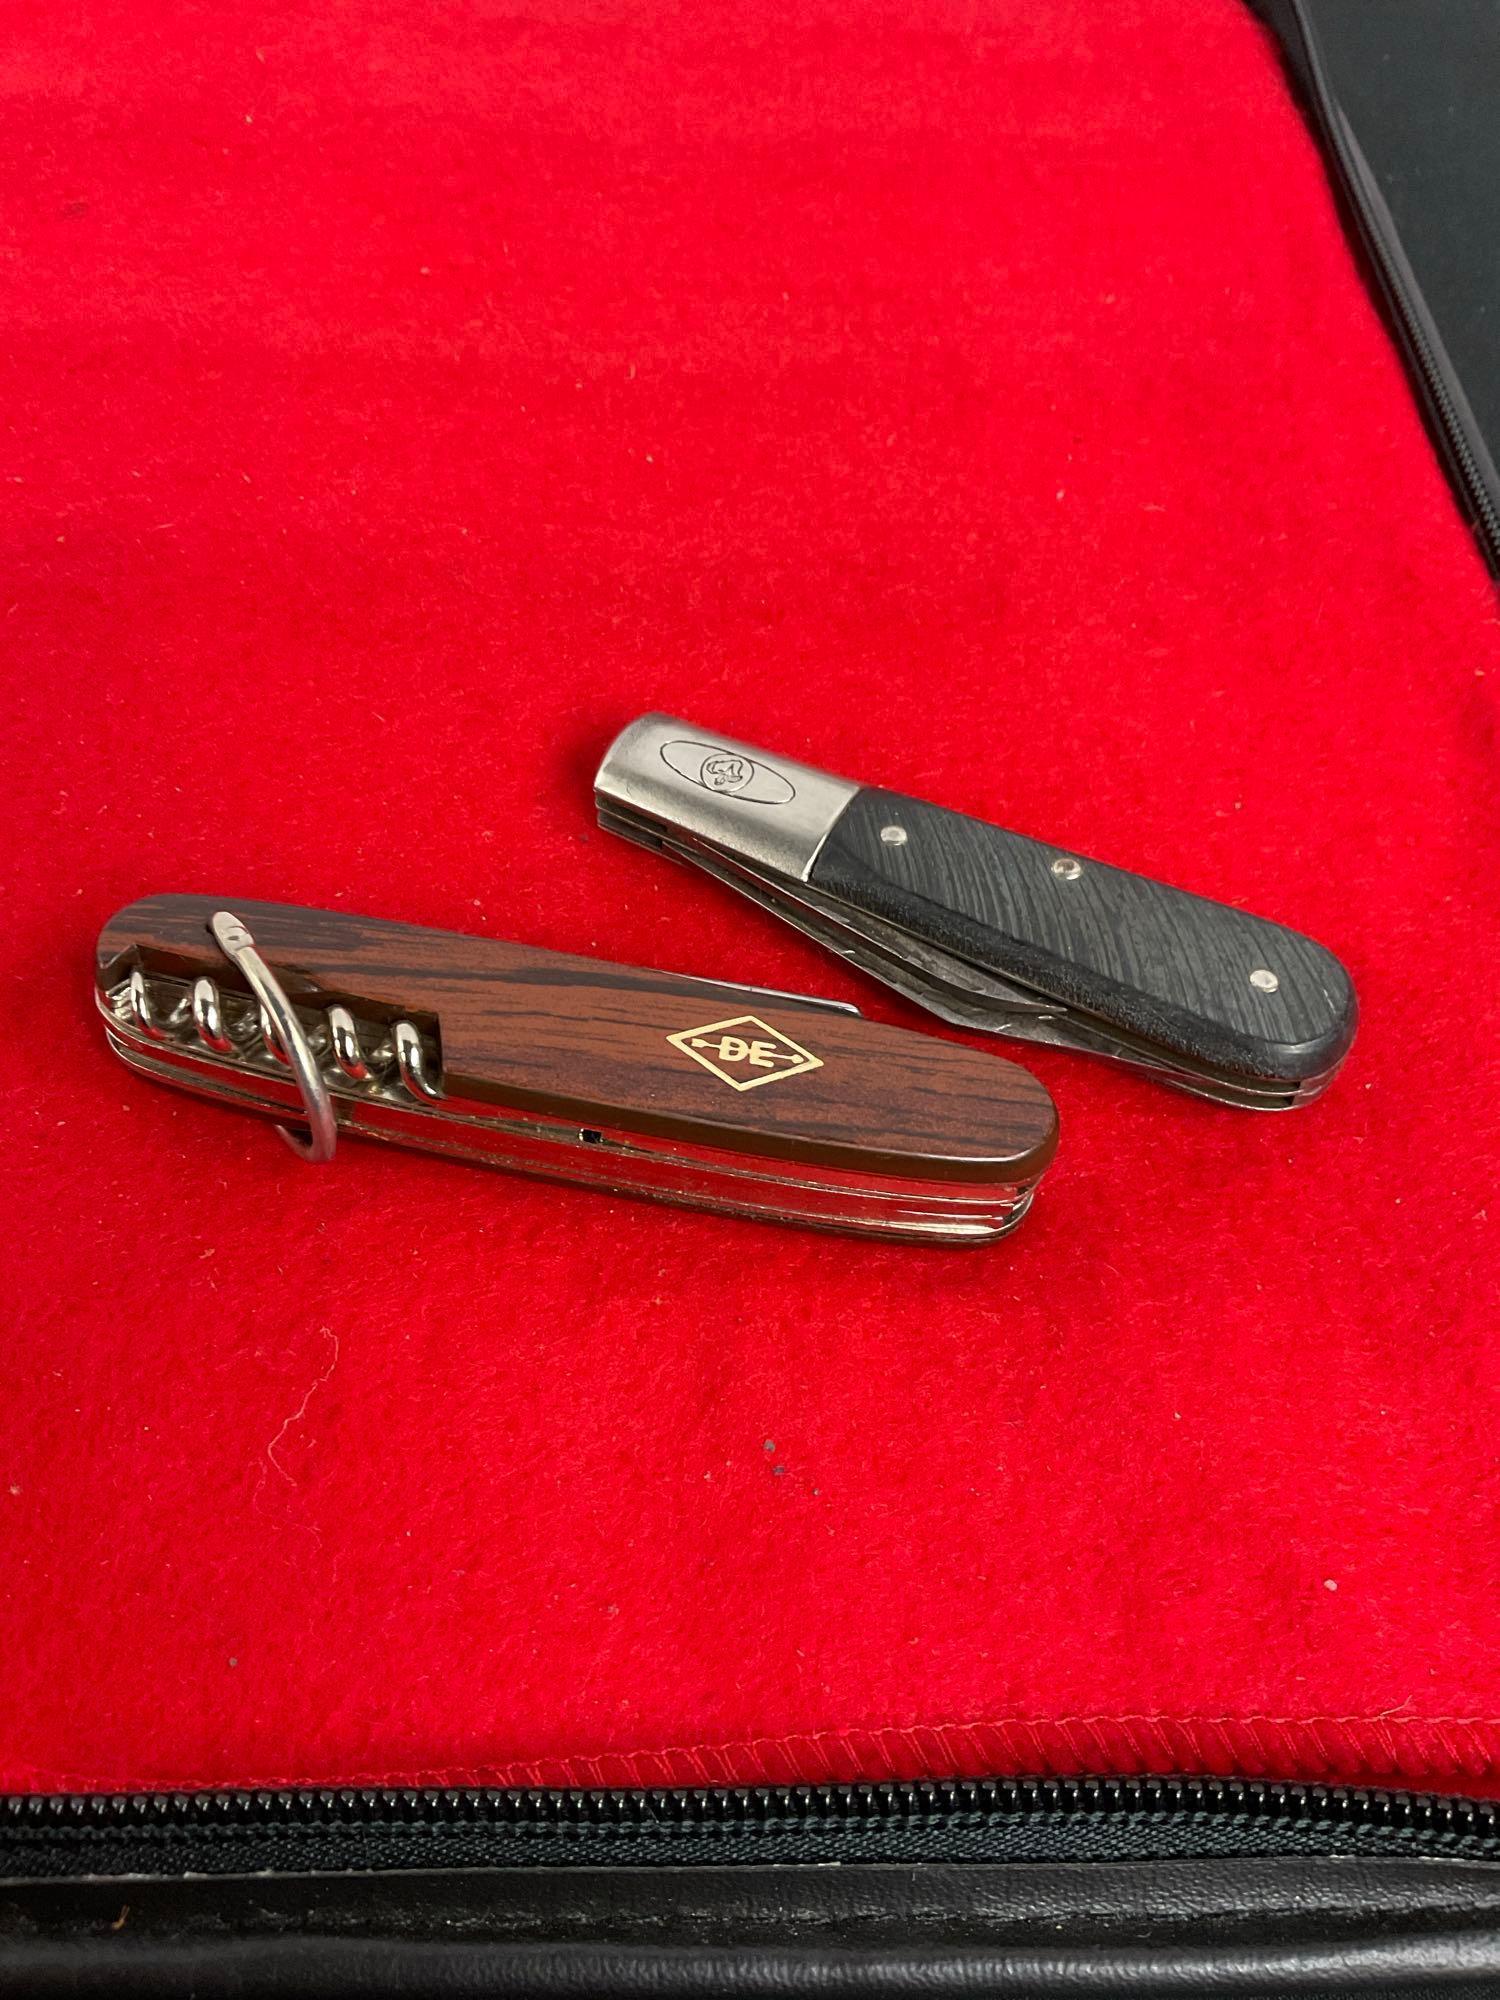 2x Imperial MultiBladed Stainless Steel Folding Blade Pocket Knives - See pics